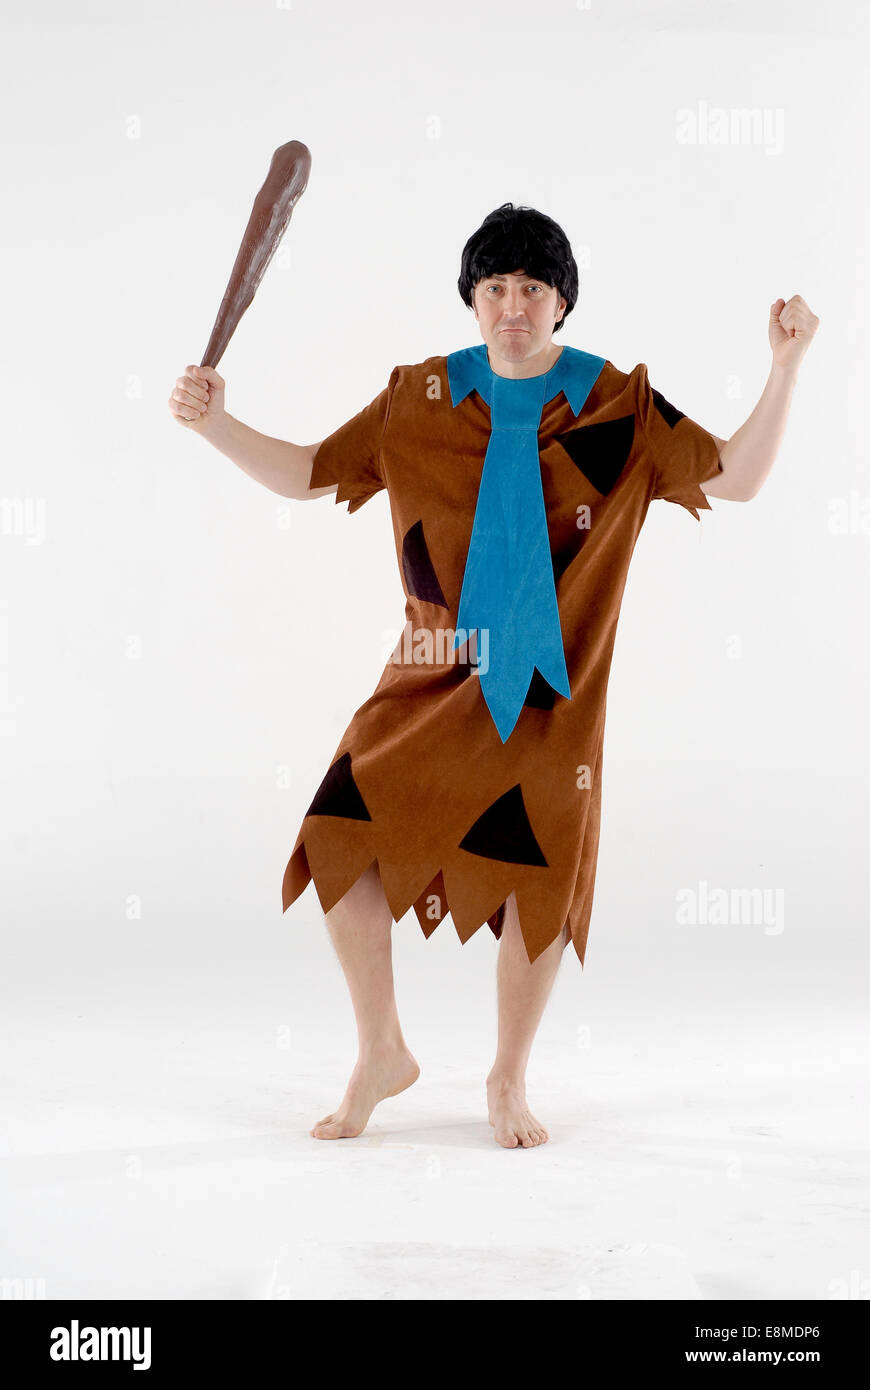 man in fancy dress comedy costume as a caveman / flintstone character from the cartoon. Either Barney Rubble or Fred Flintstone Stock Photo